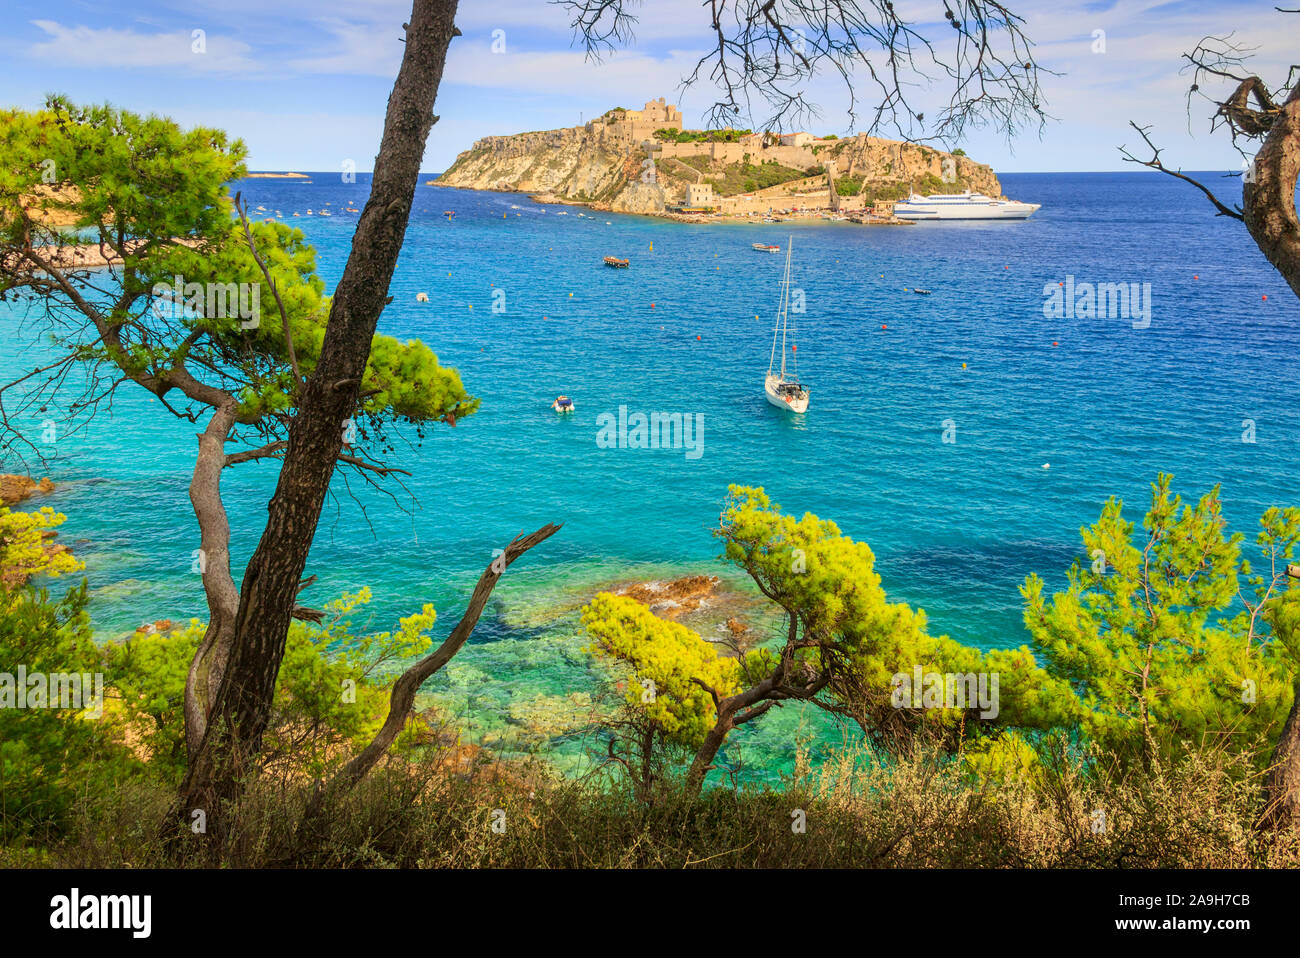 The archipelago of the Tremiti Islands: San Nicola island in background. It's dominated by the fortified towers of San Nicola and the Abbey. Stock Photo